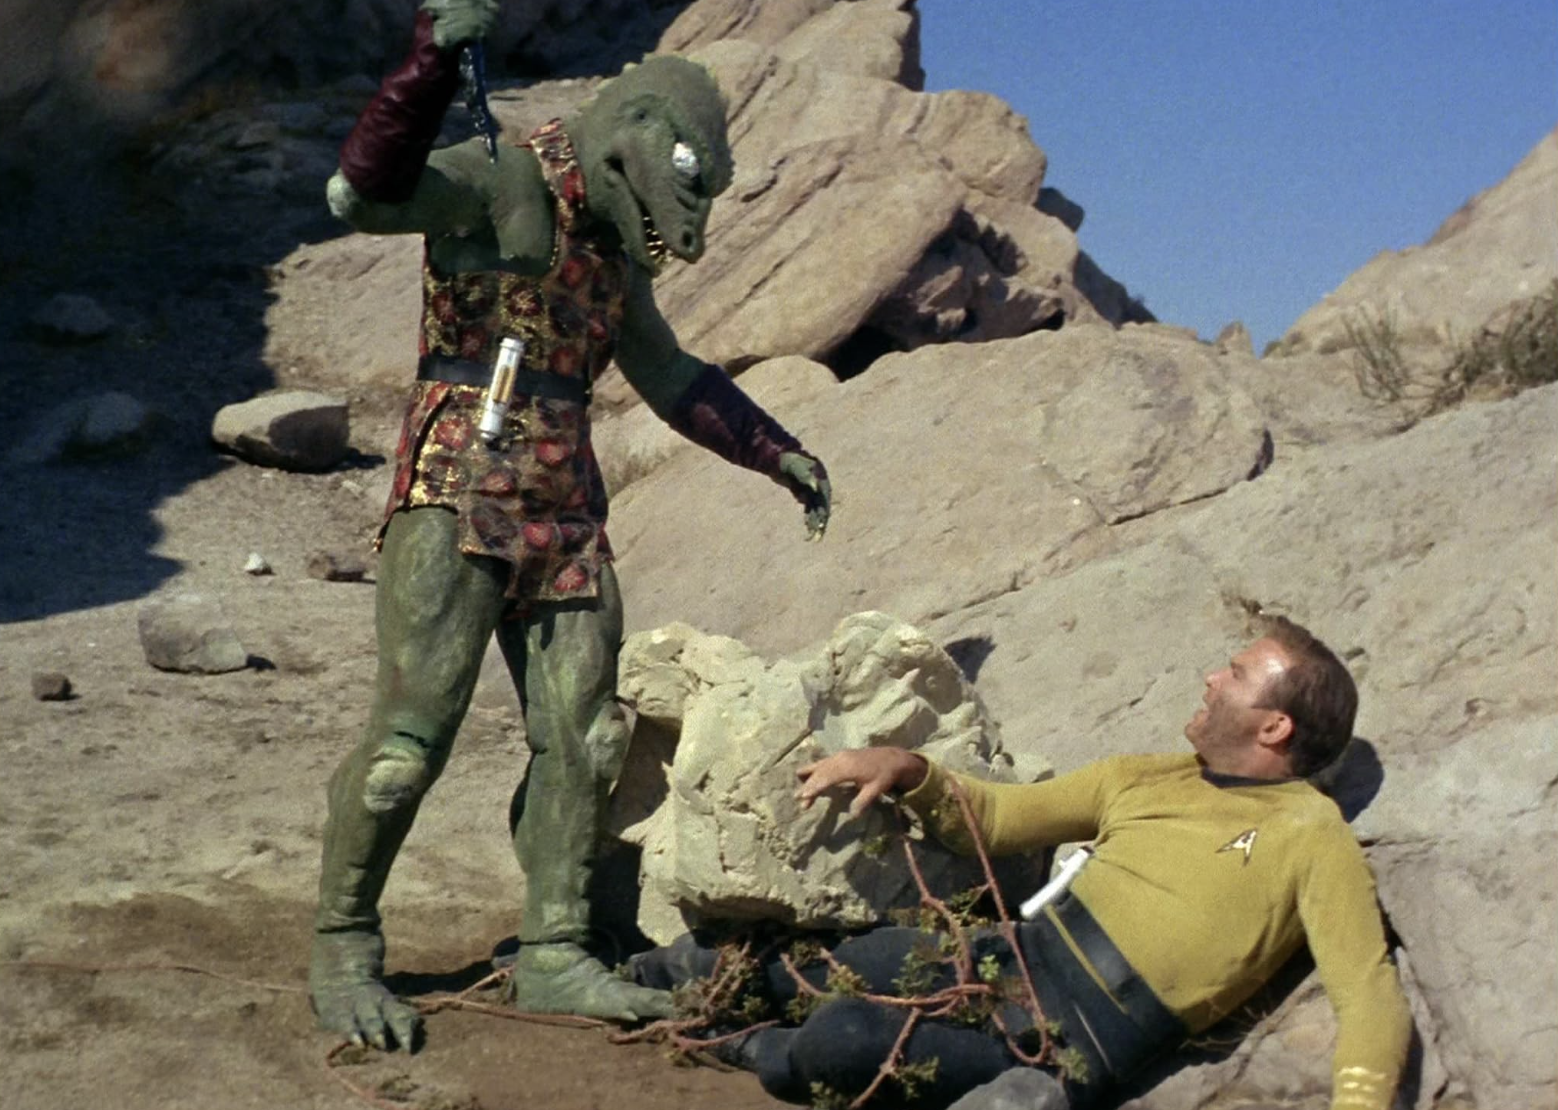 <p>- IMDb user rating: 7.9<br> - Season 1, Episode 18<br> - Director: Joseph Pevney</p>  <p>Episode 18 of "Star Trek" showcases some of Kirk's physical combat abilities as he is forced to fight a member of the reptile species known as the Gorn. The fight scene between Kirk and the Gorn captain was shot at the <a href="https://www.travelinusa.us/vasquez-rocks/#google_vignette">Vasquez Rocks</a>, a location used so frequently by the franchise that it is nicknamed the "Star Trek Rocks." Modern audiences have mocked and parodied <a href="https://www.youtube.com/watch?v=4SK0cUNMnMM">the fight scene</a>, but its iconic status has never been disputed.</p>